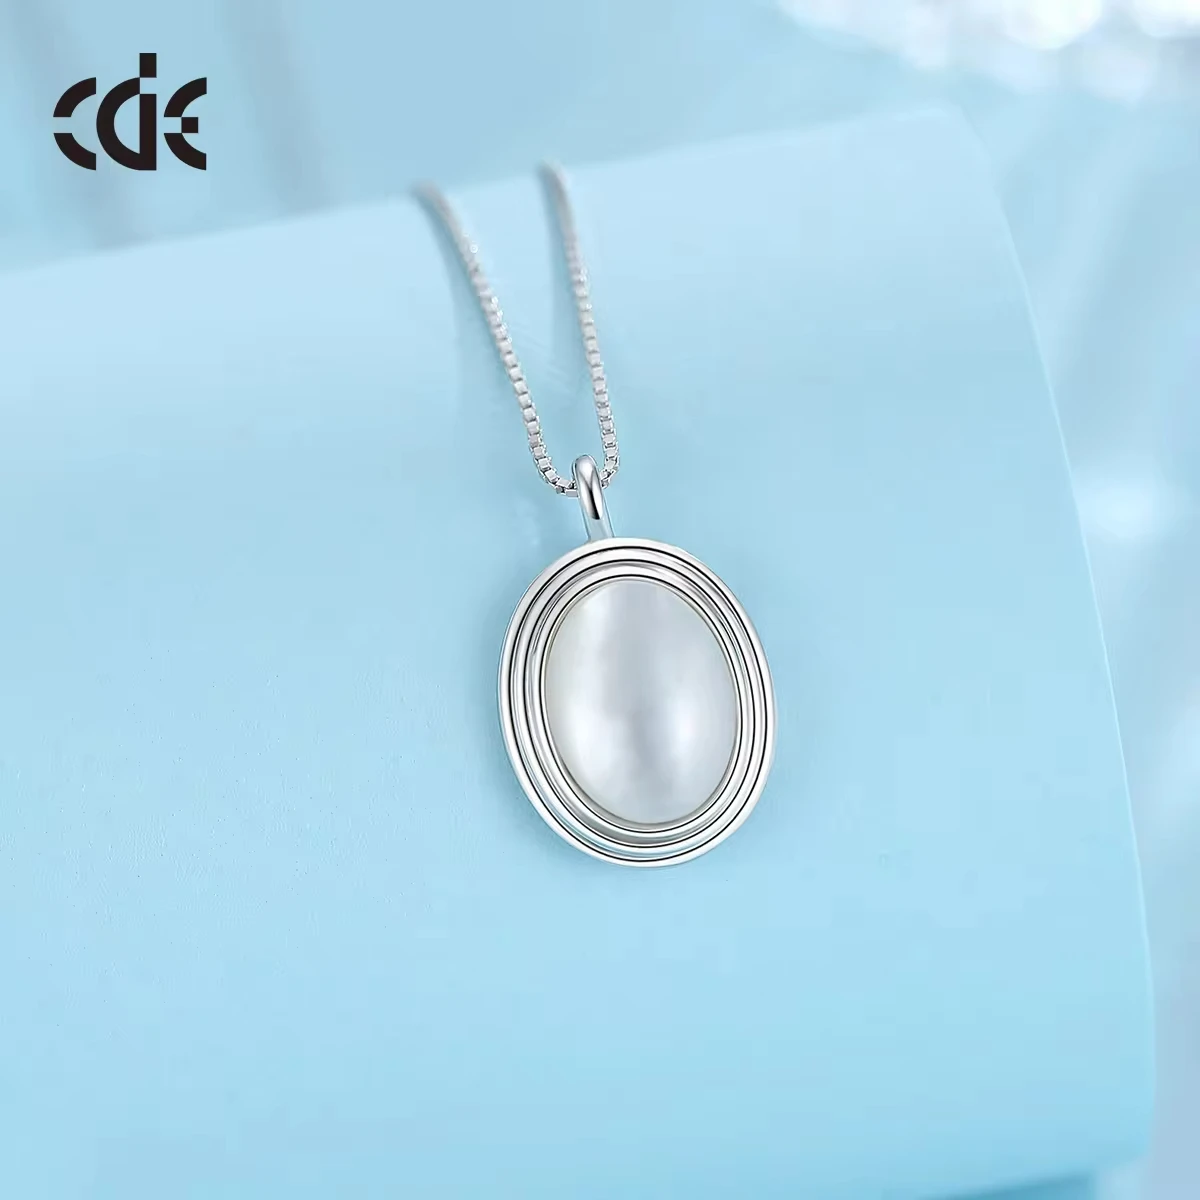 CDE PRYN007 Luxury 925 Silver Jewelry Necklace Wholesale Rhodium Plated Mother Of Pearl Shell Women Oval Shaped Necklace